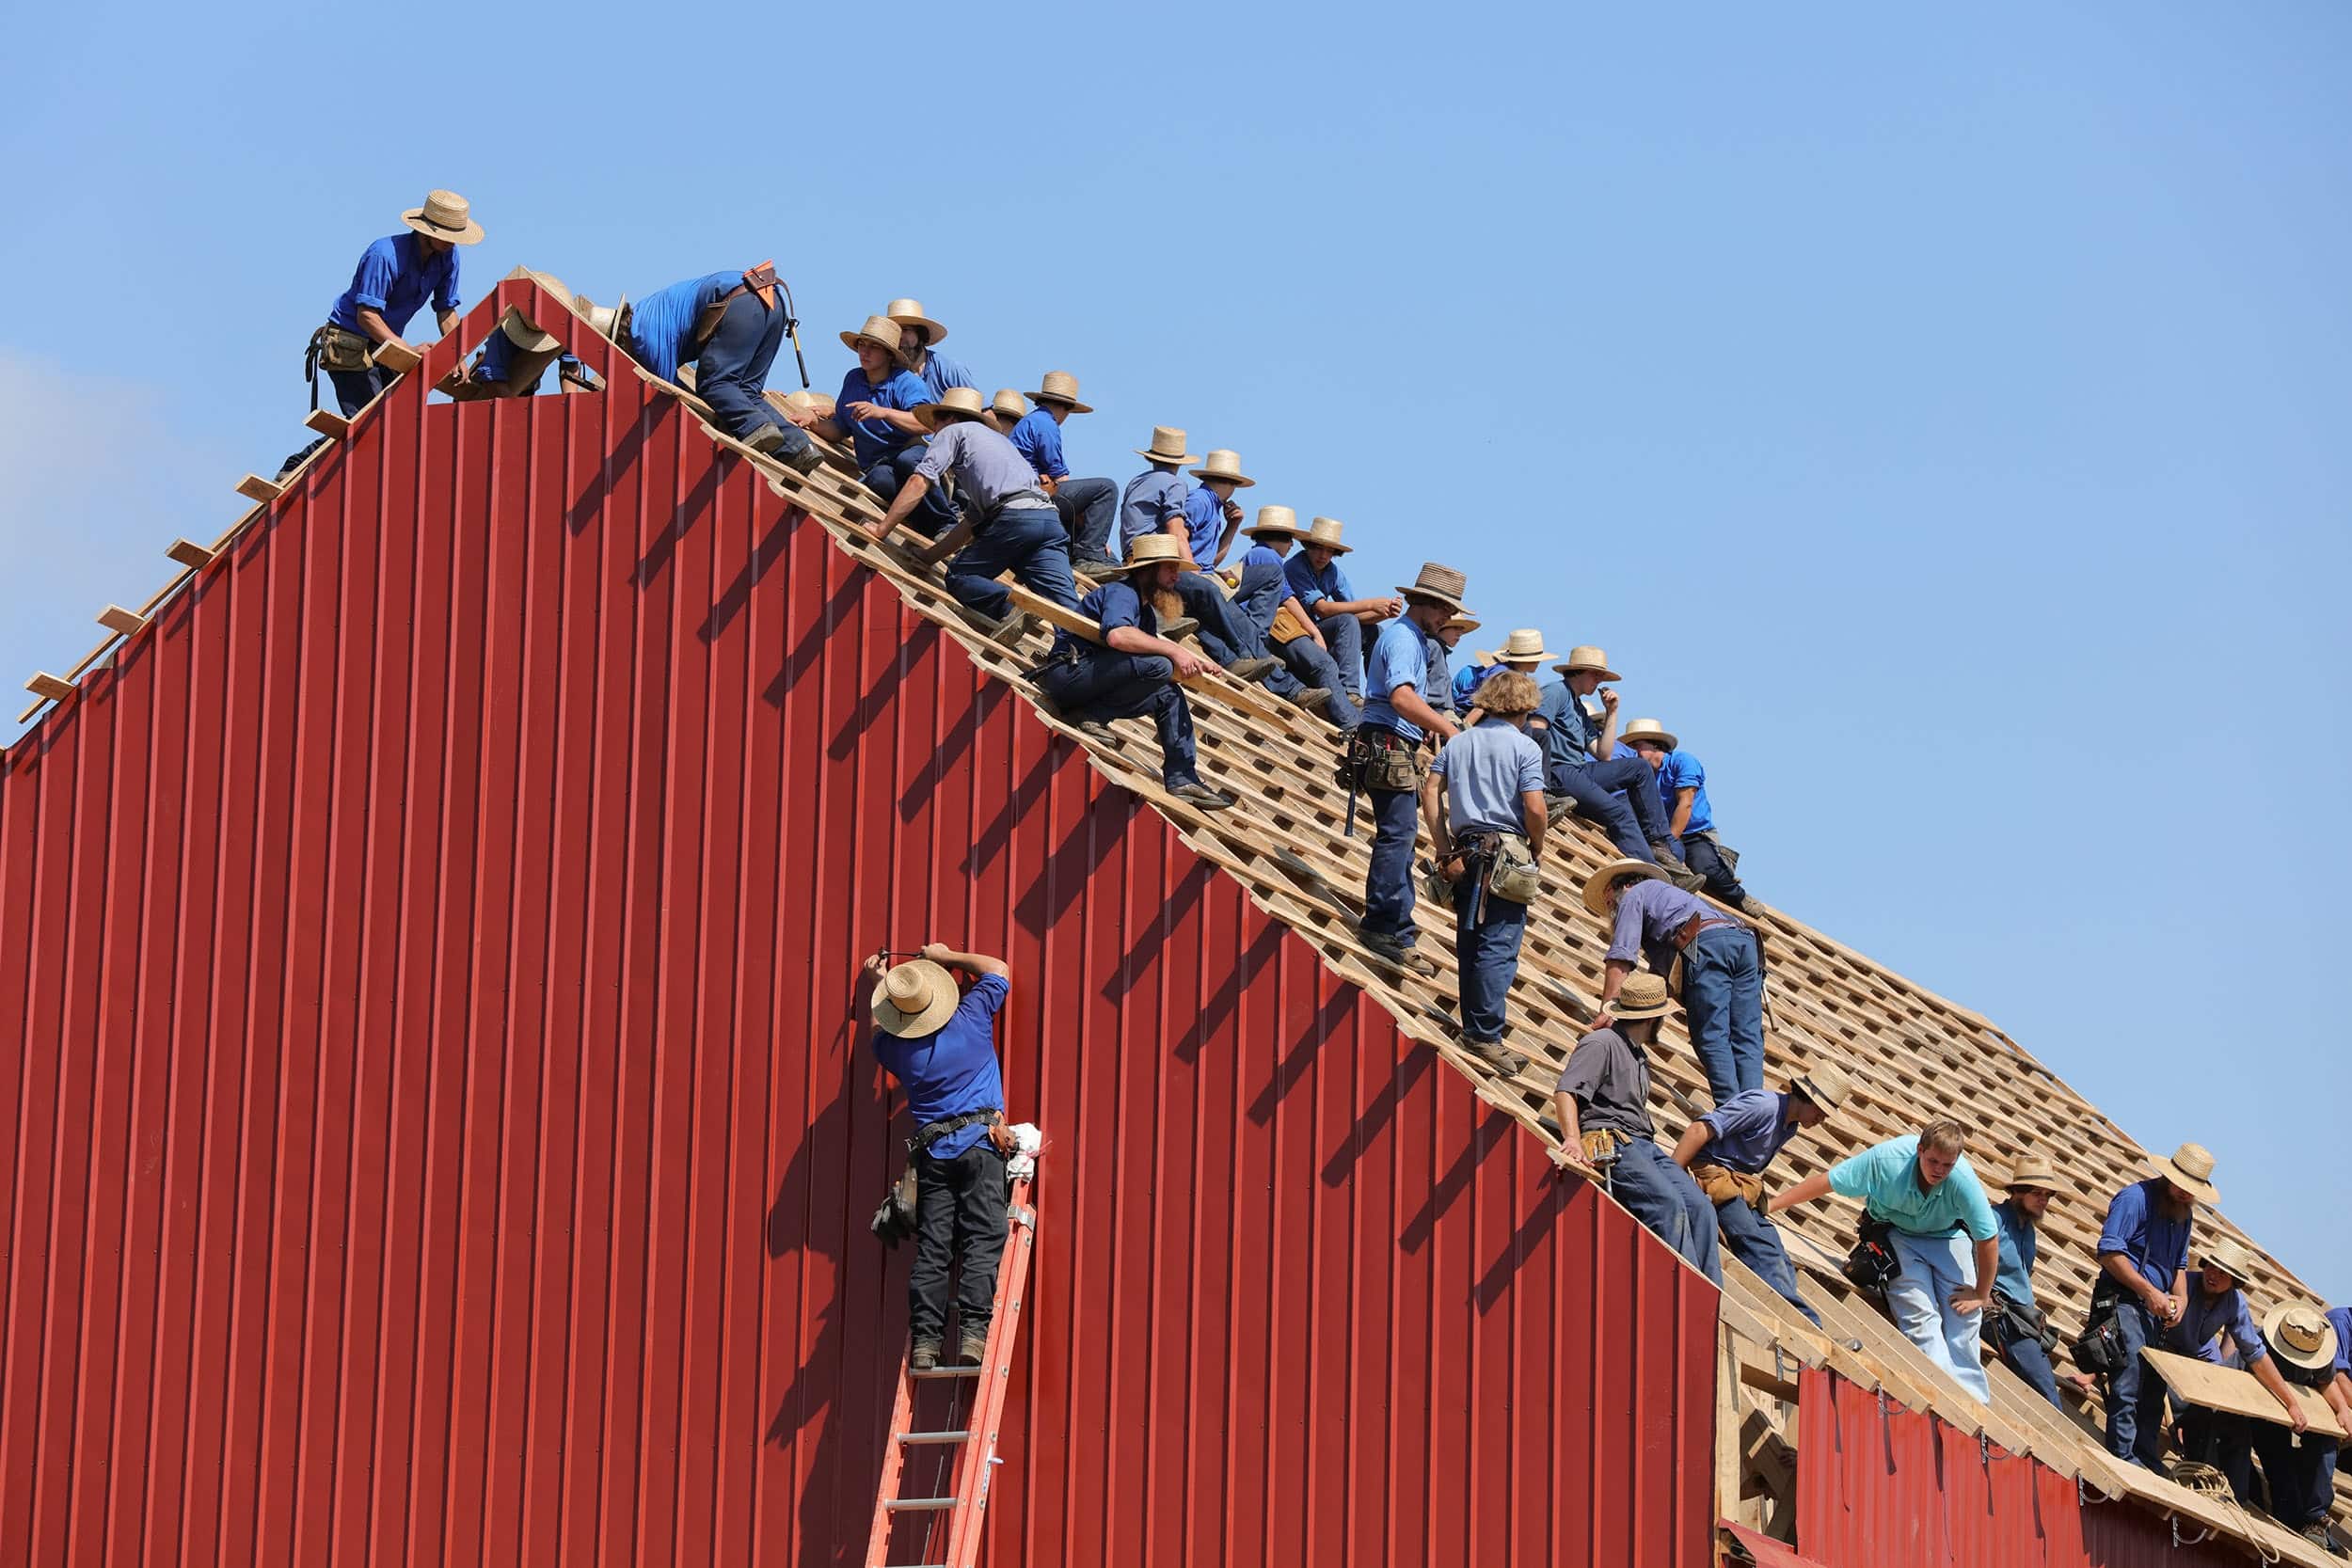 men working together on a barn-raising